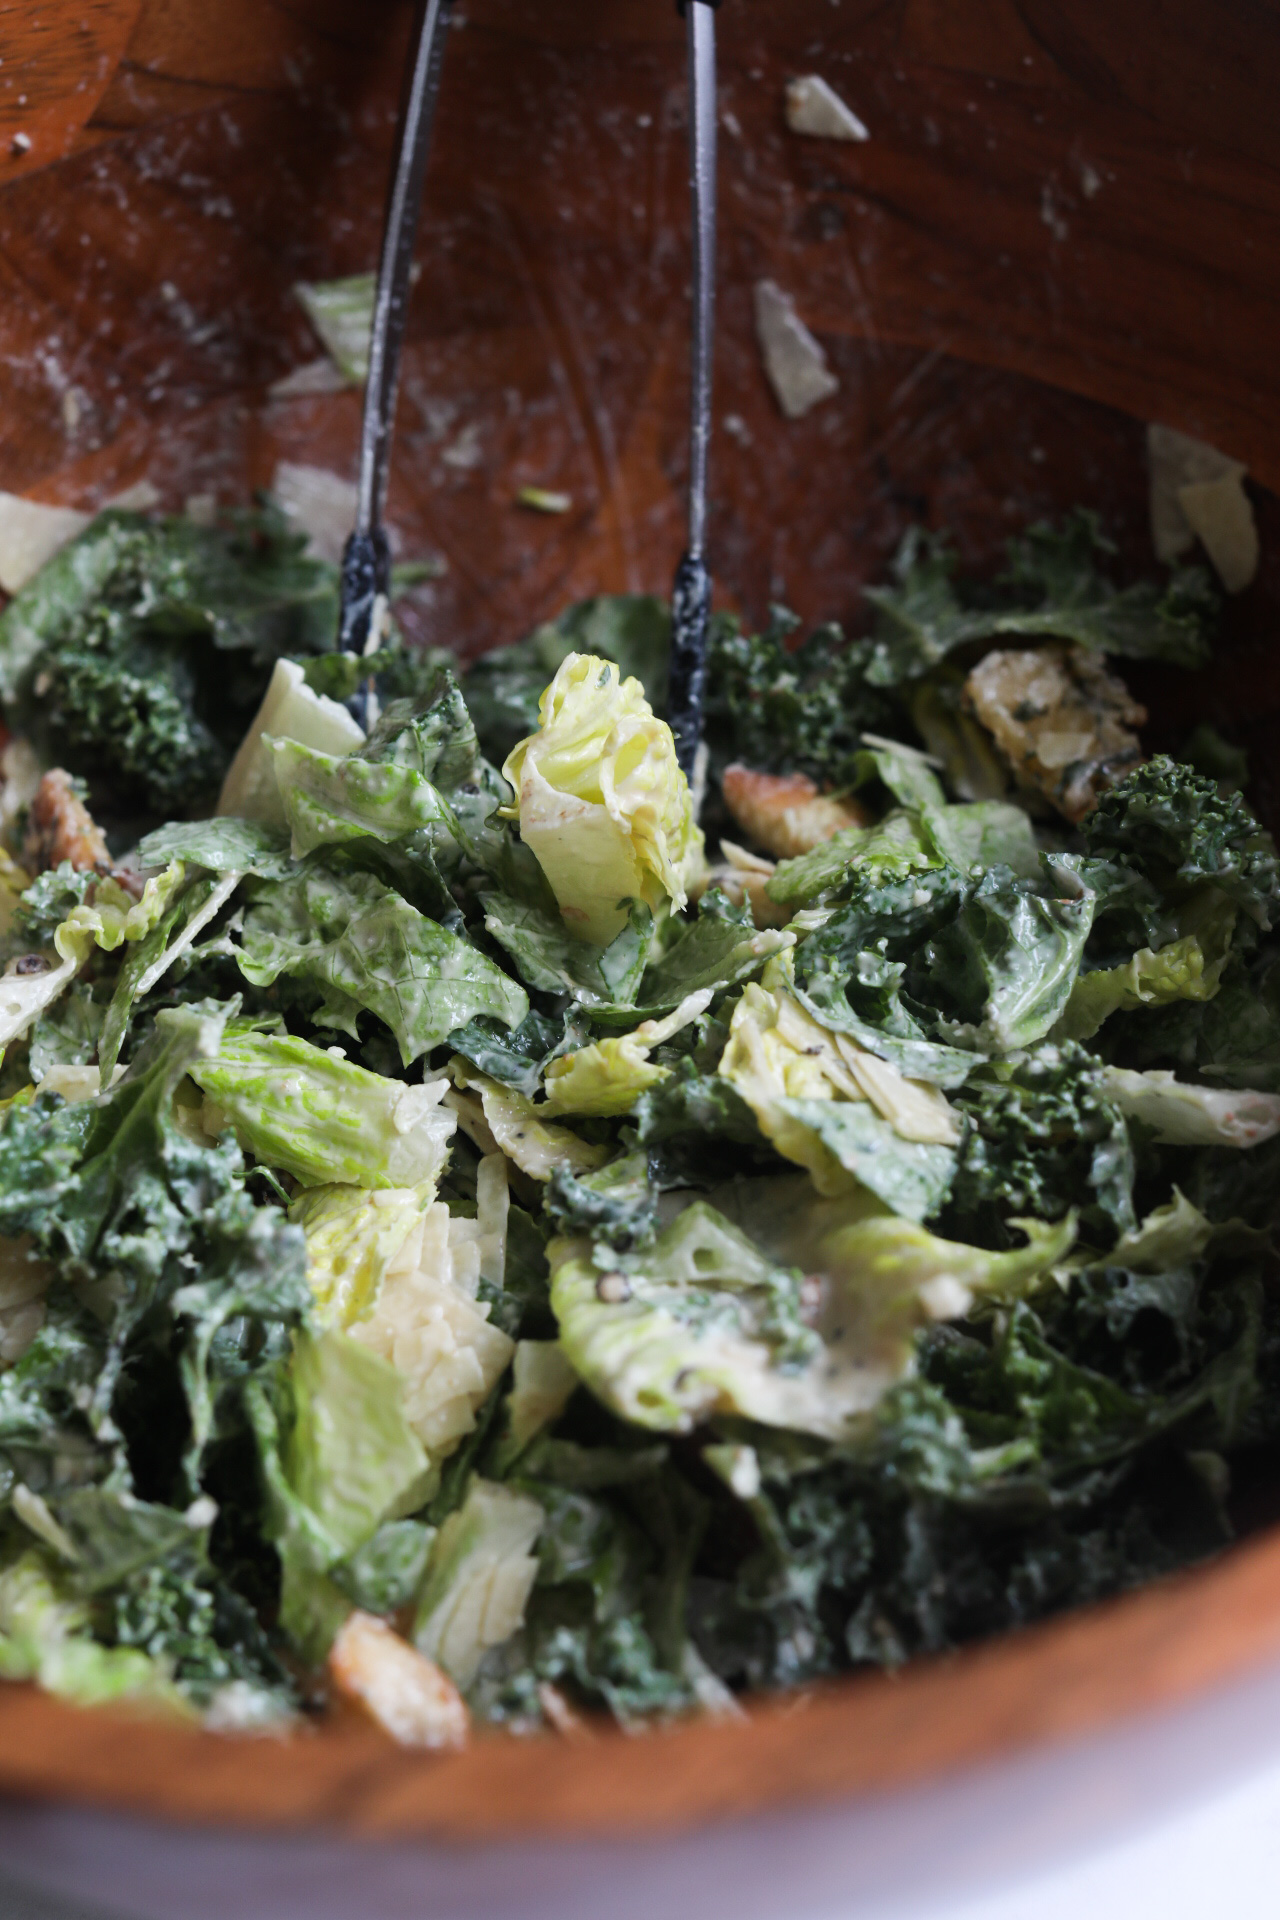 Caesar salad mixed in a wooden bowl with homemade croutons and black tongs.